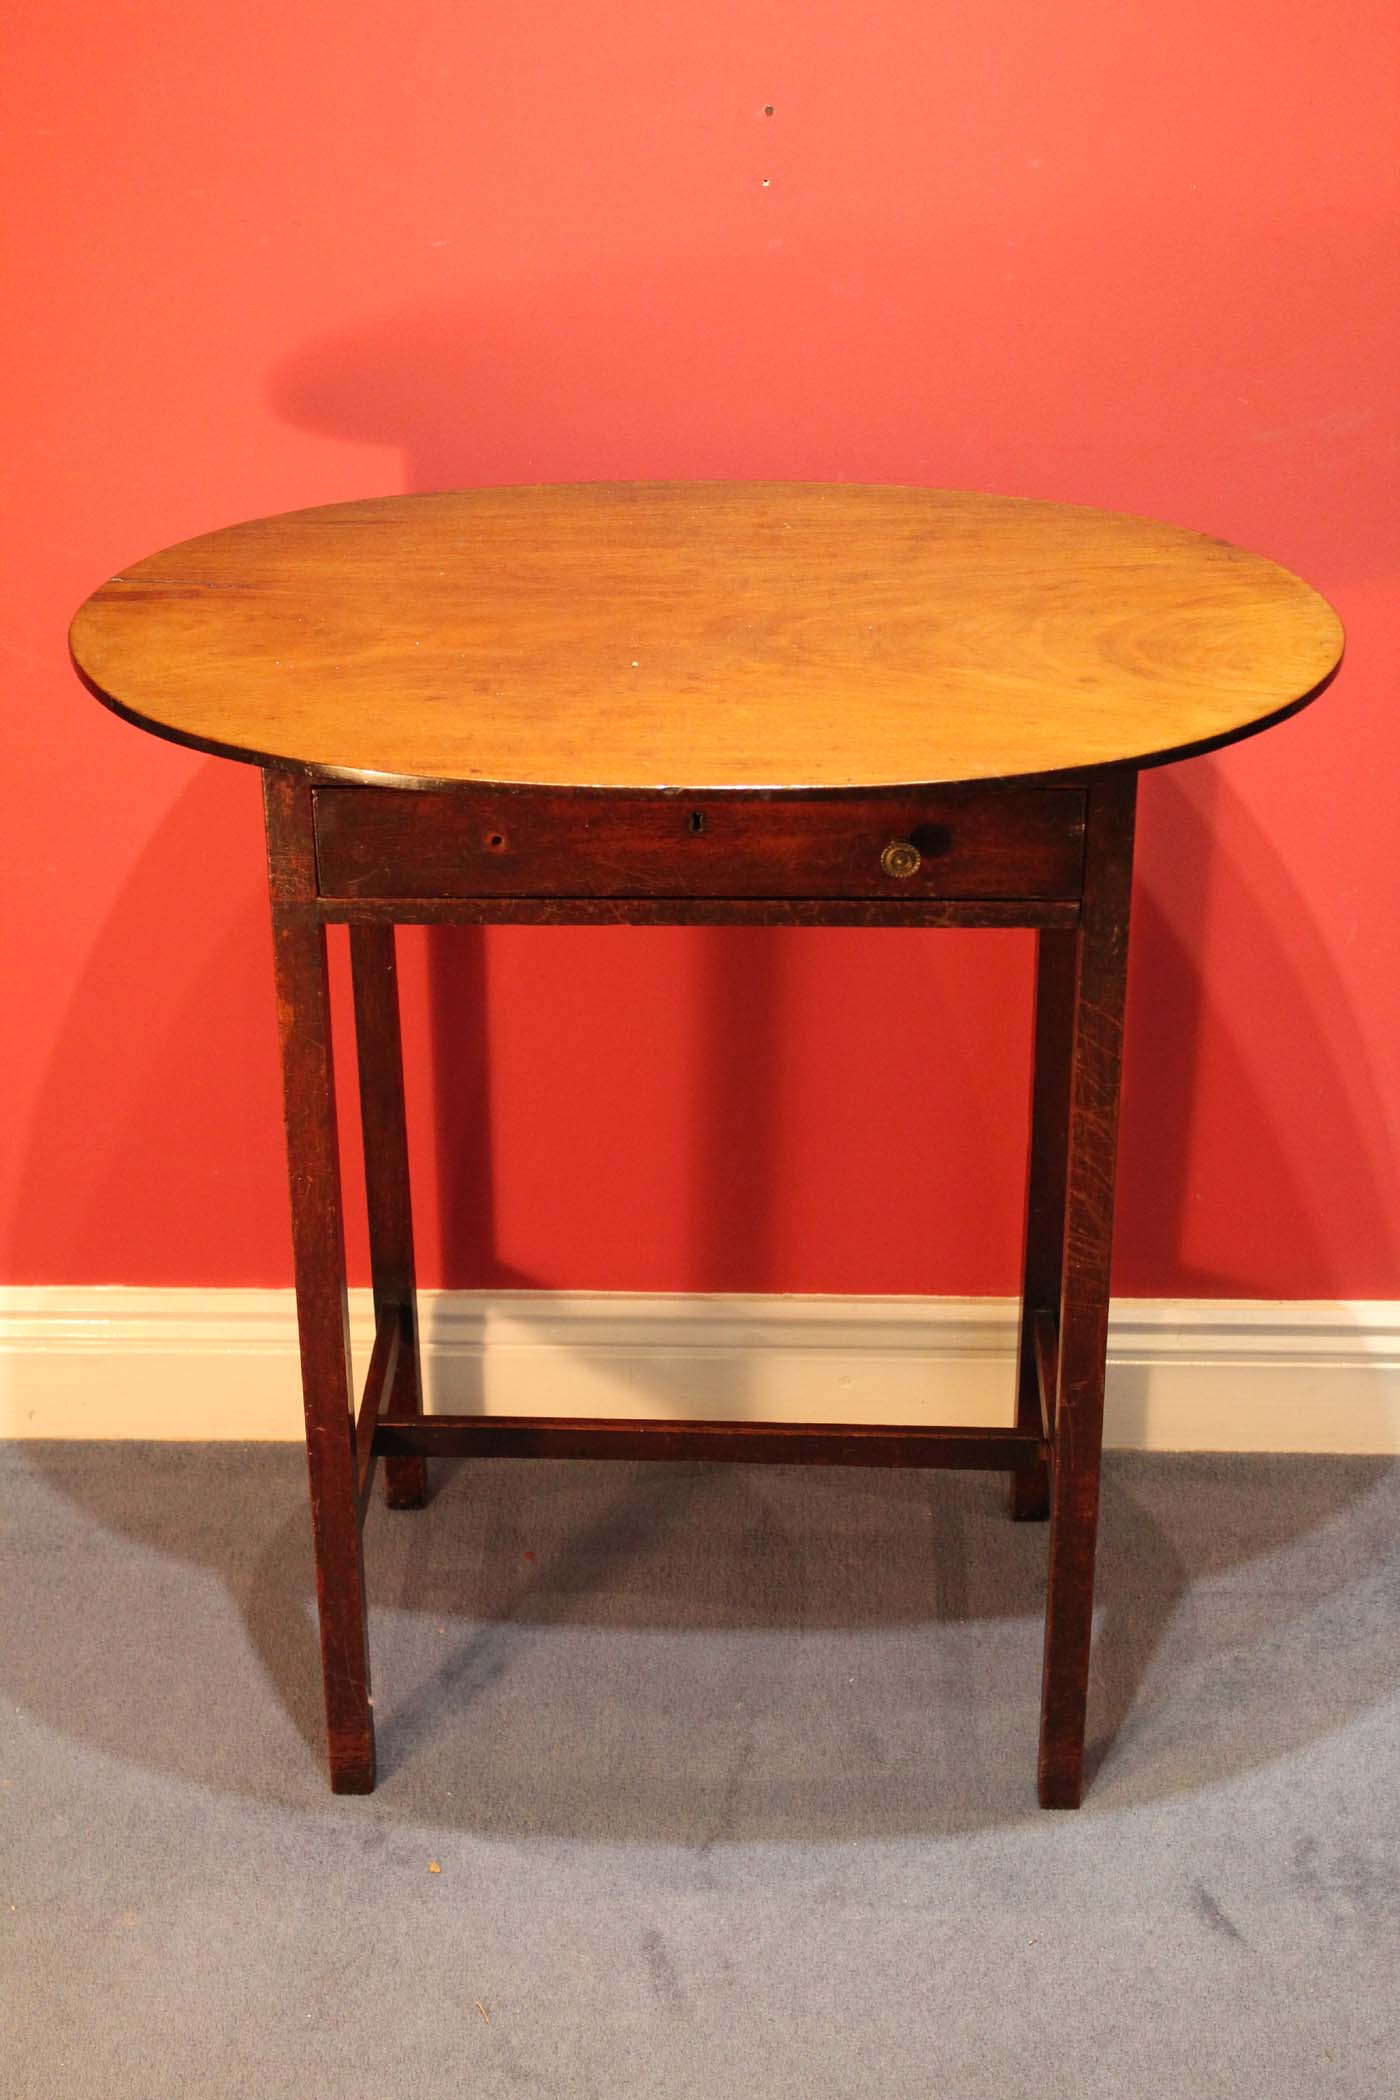 A MAHOGANY CHAMBER TABLE, c,1800 with oval top with one frieze drawer on square legs. 71cm high x